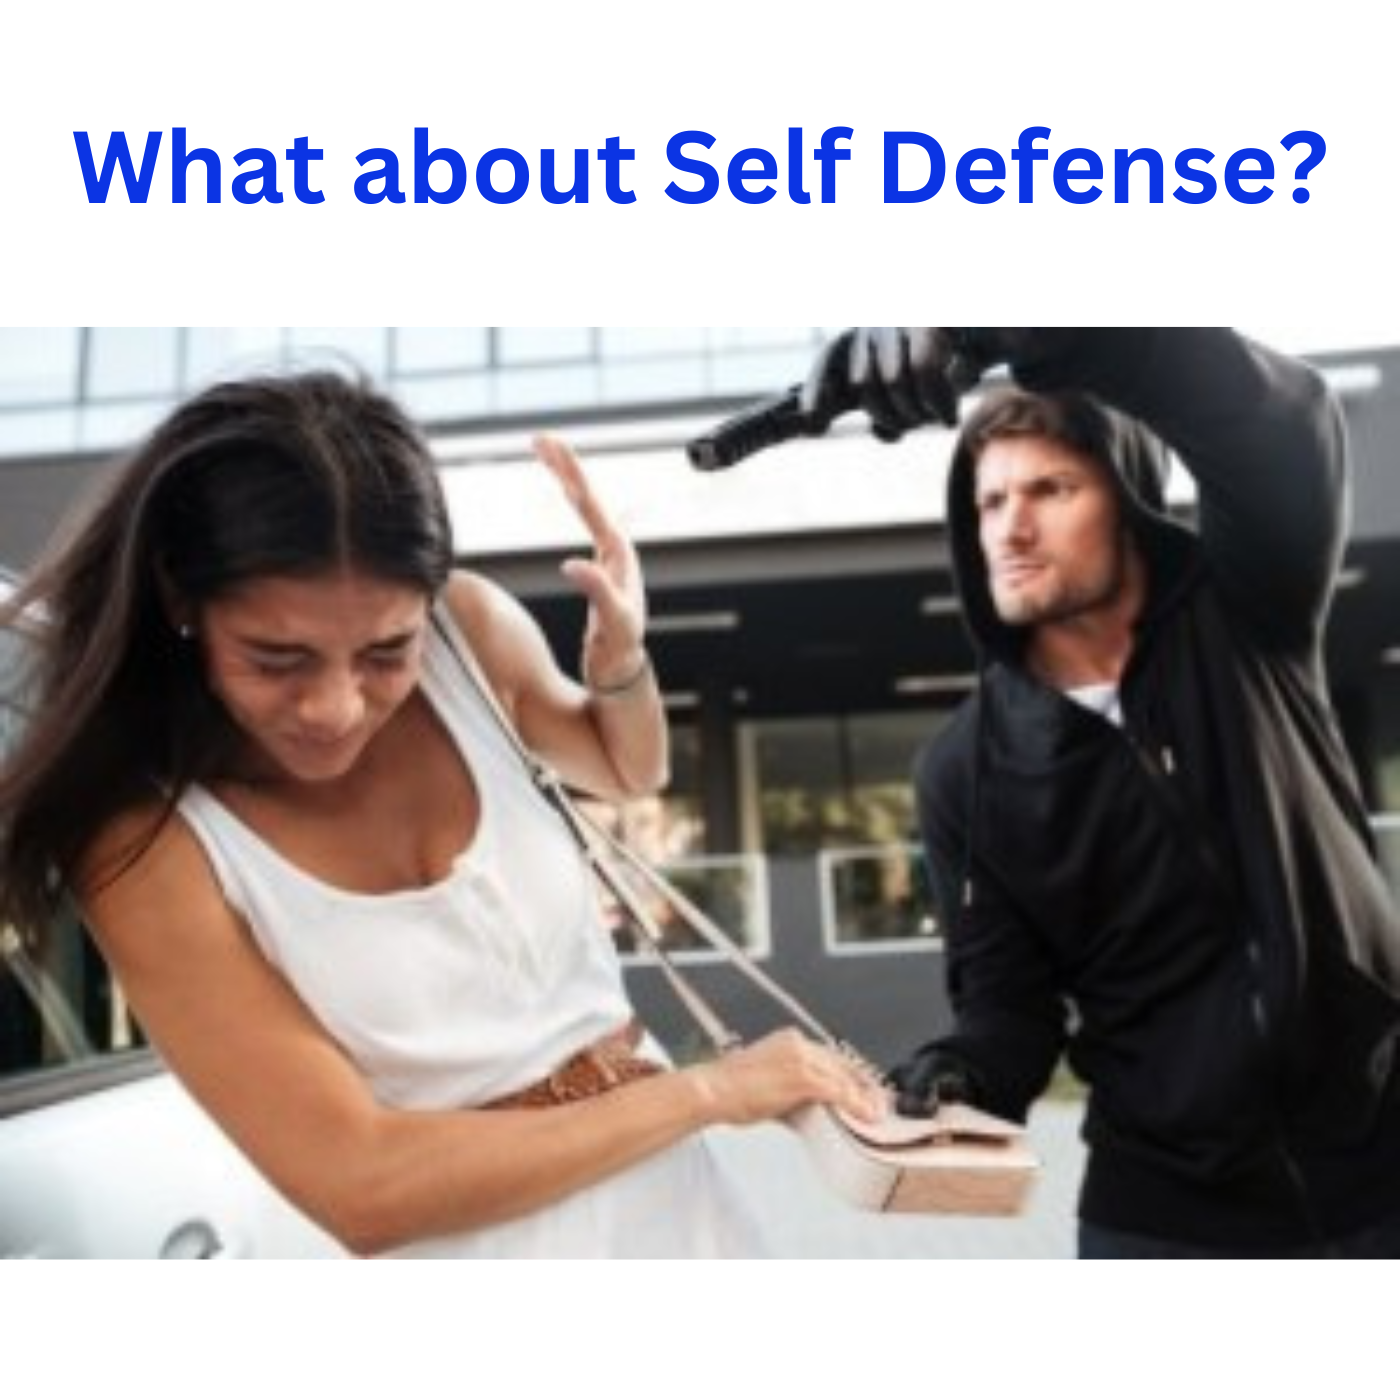 What about Self Defense?